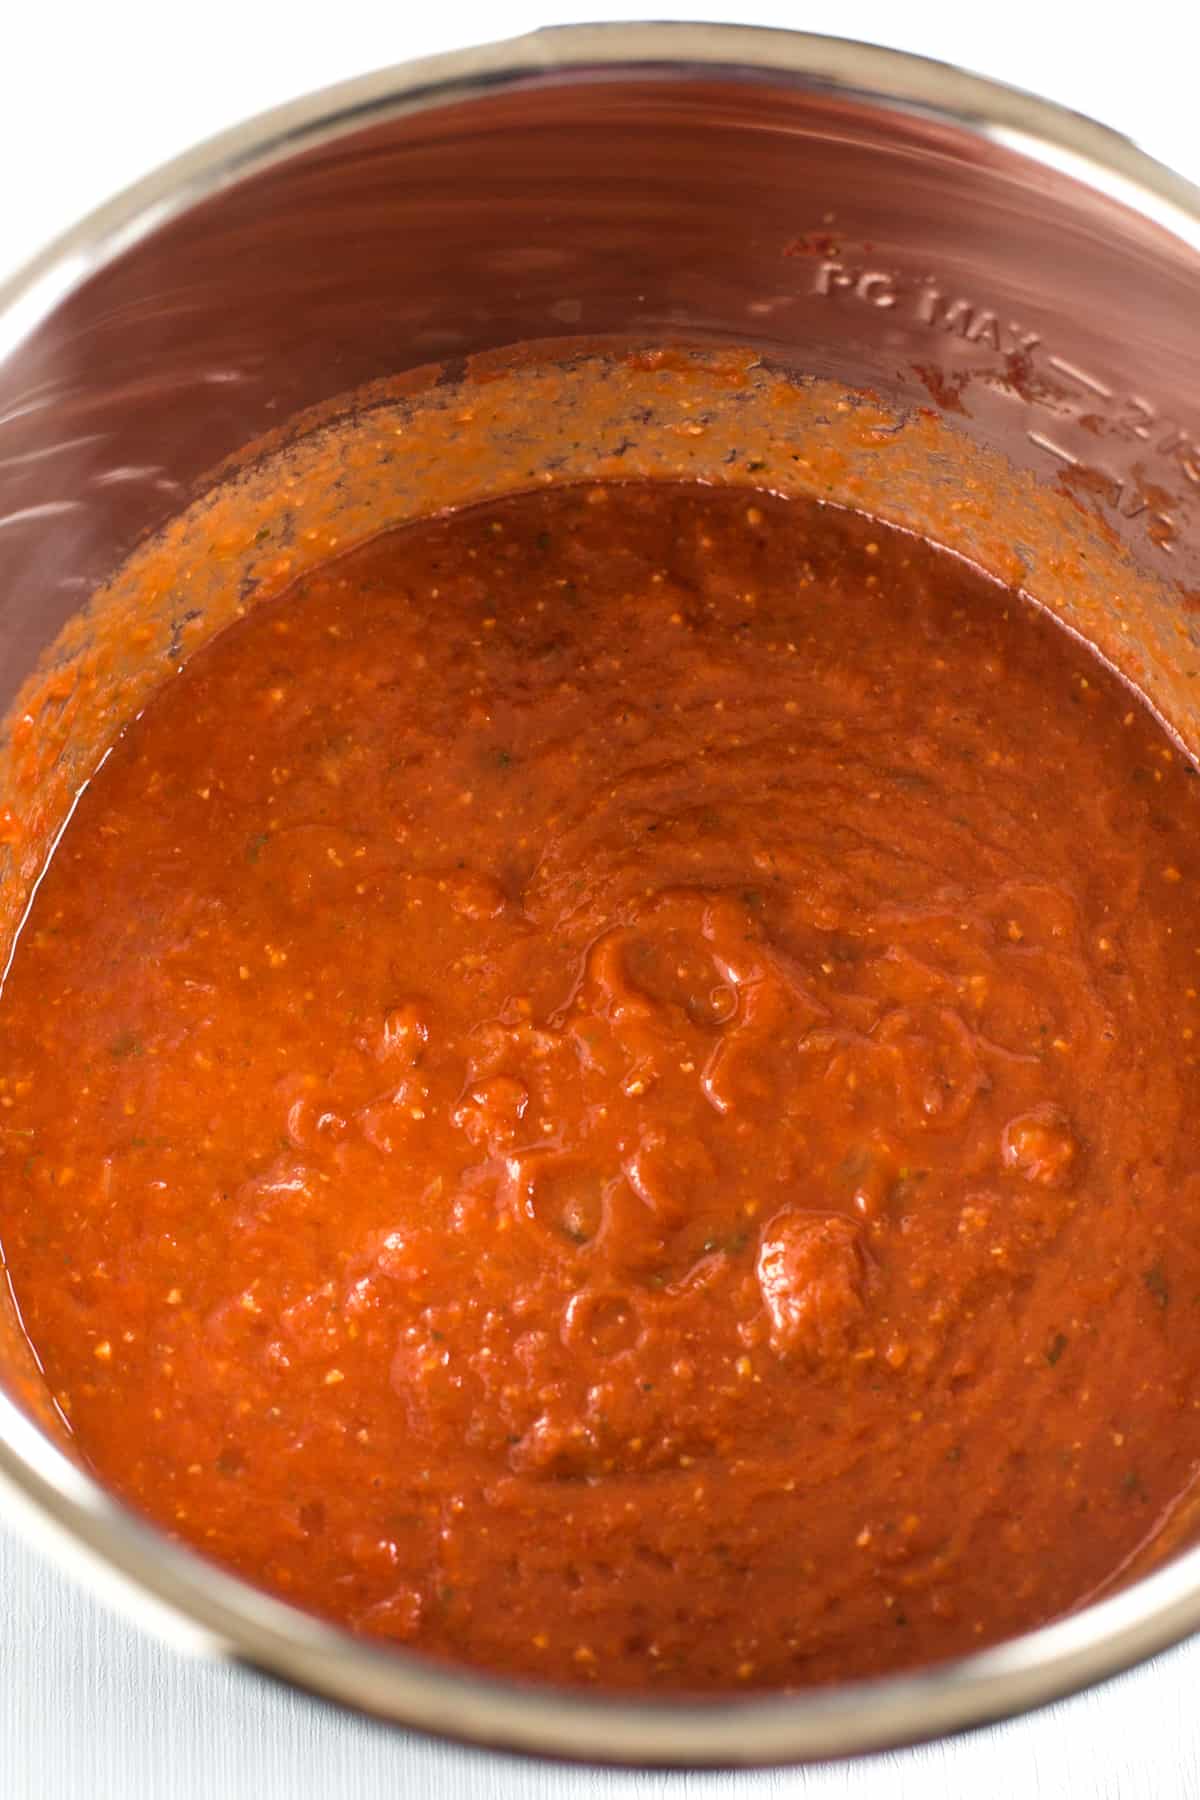 Blended slow cooker tomato sauce in the pot.